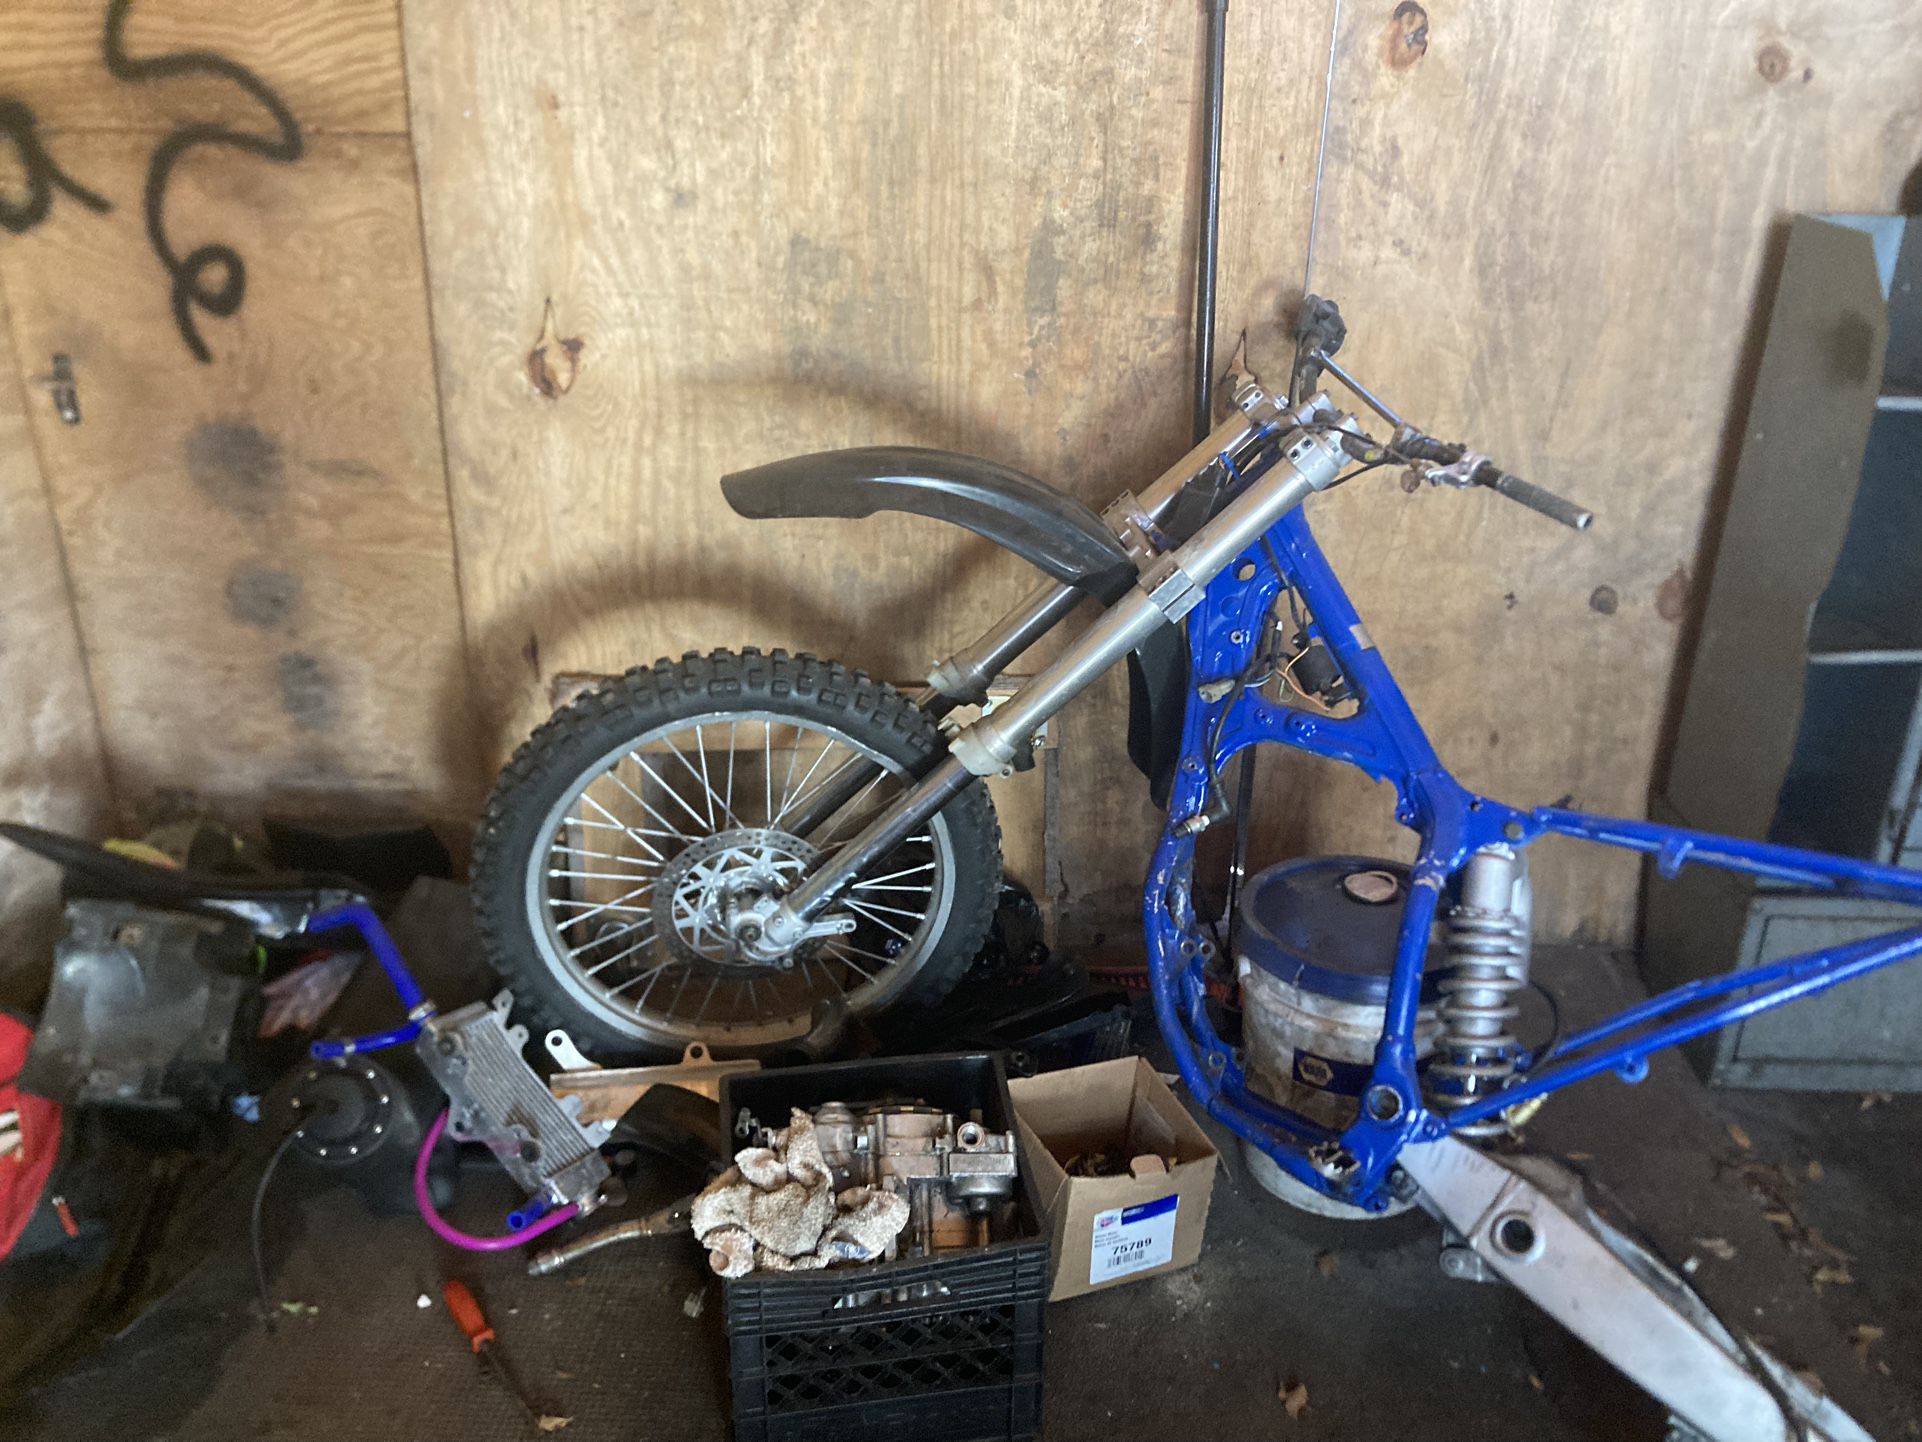 ‘98 Yz125 PART OUT!